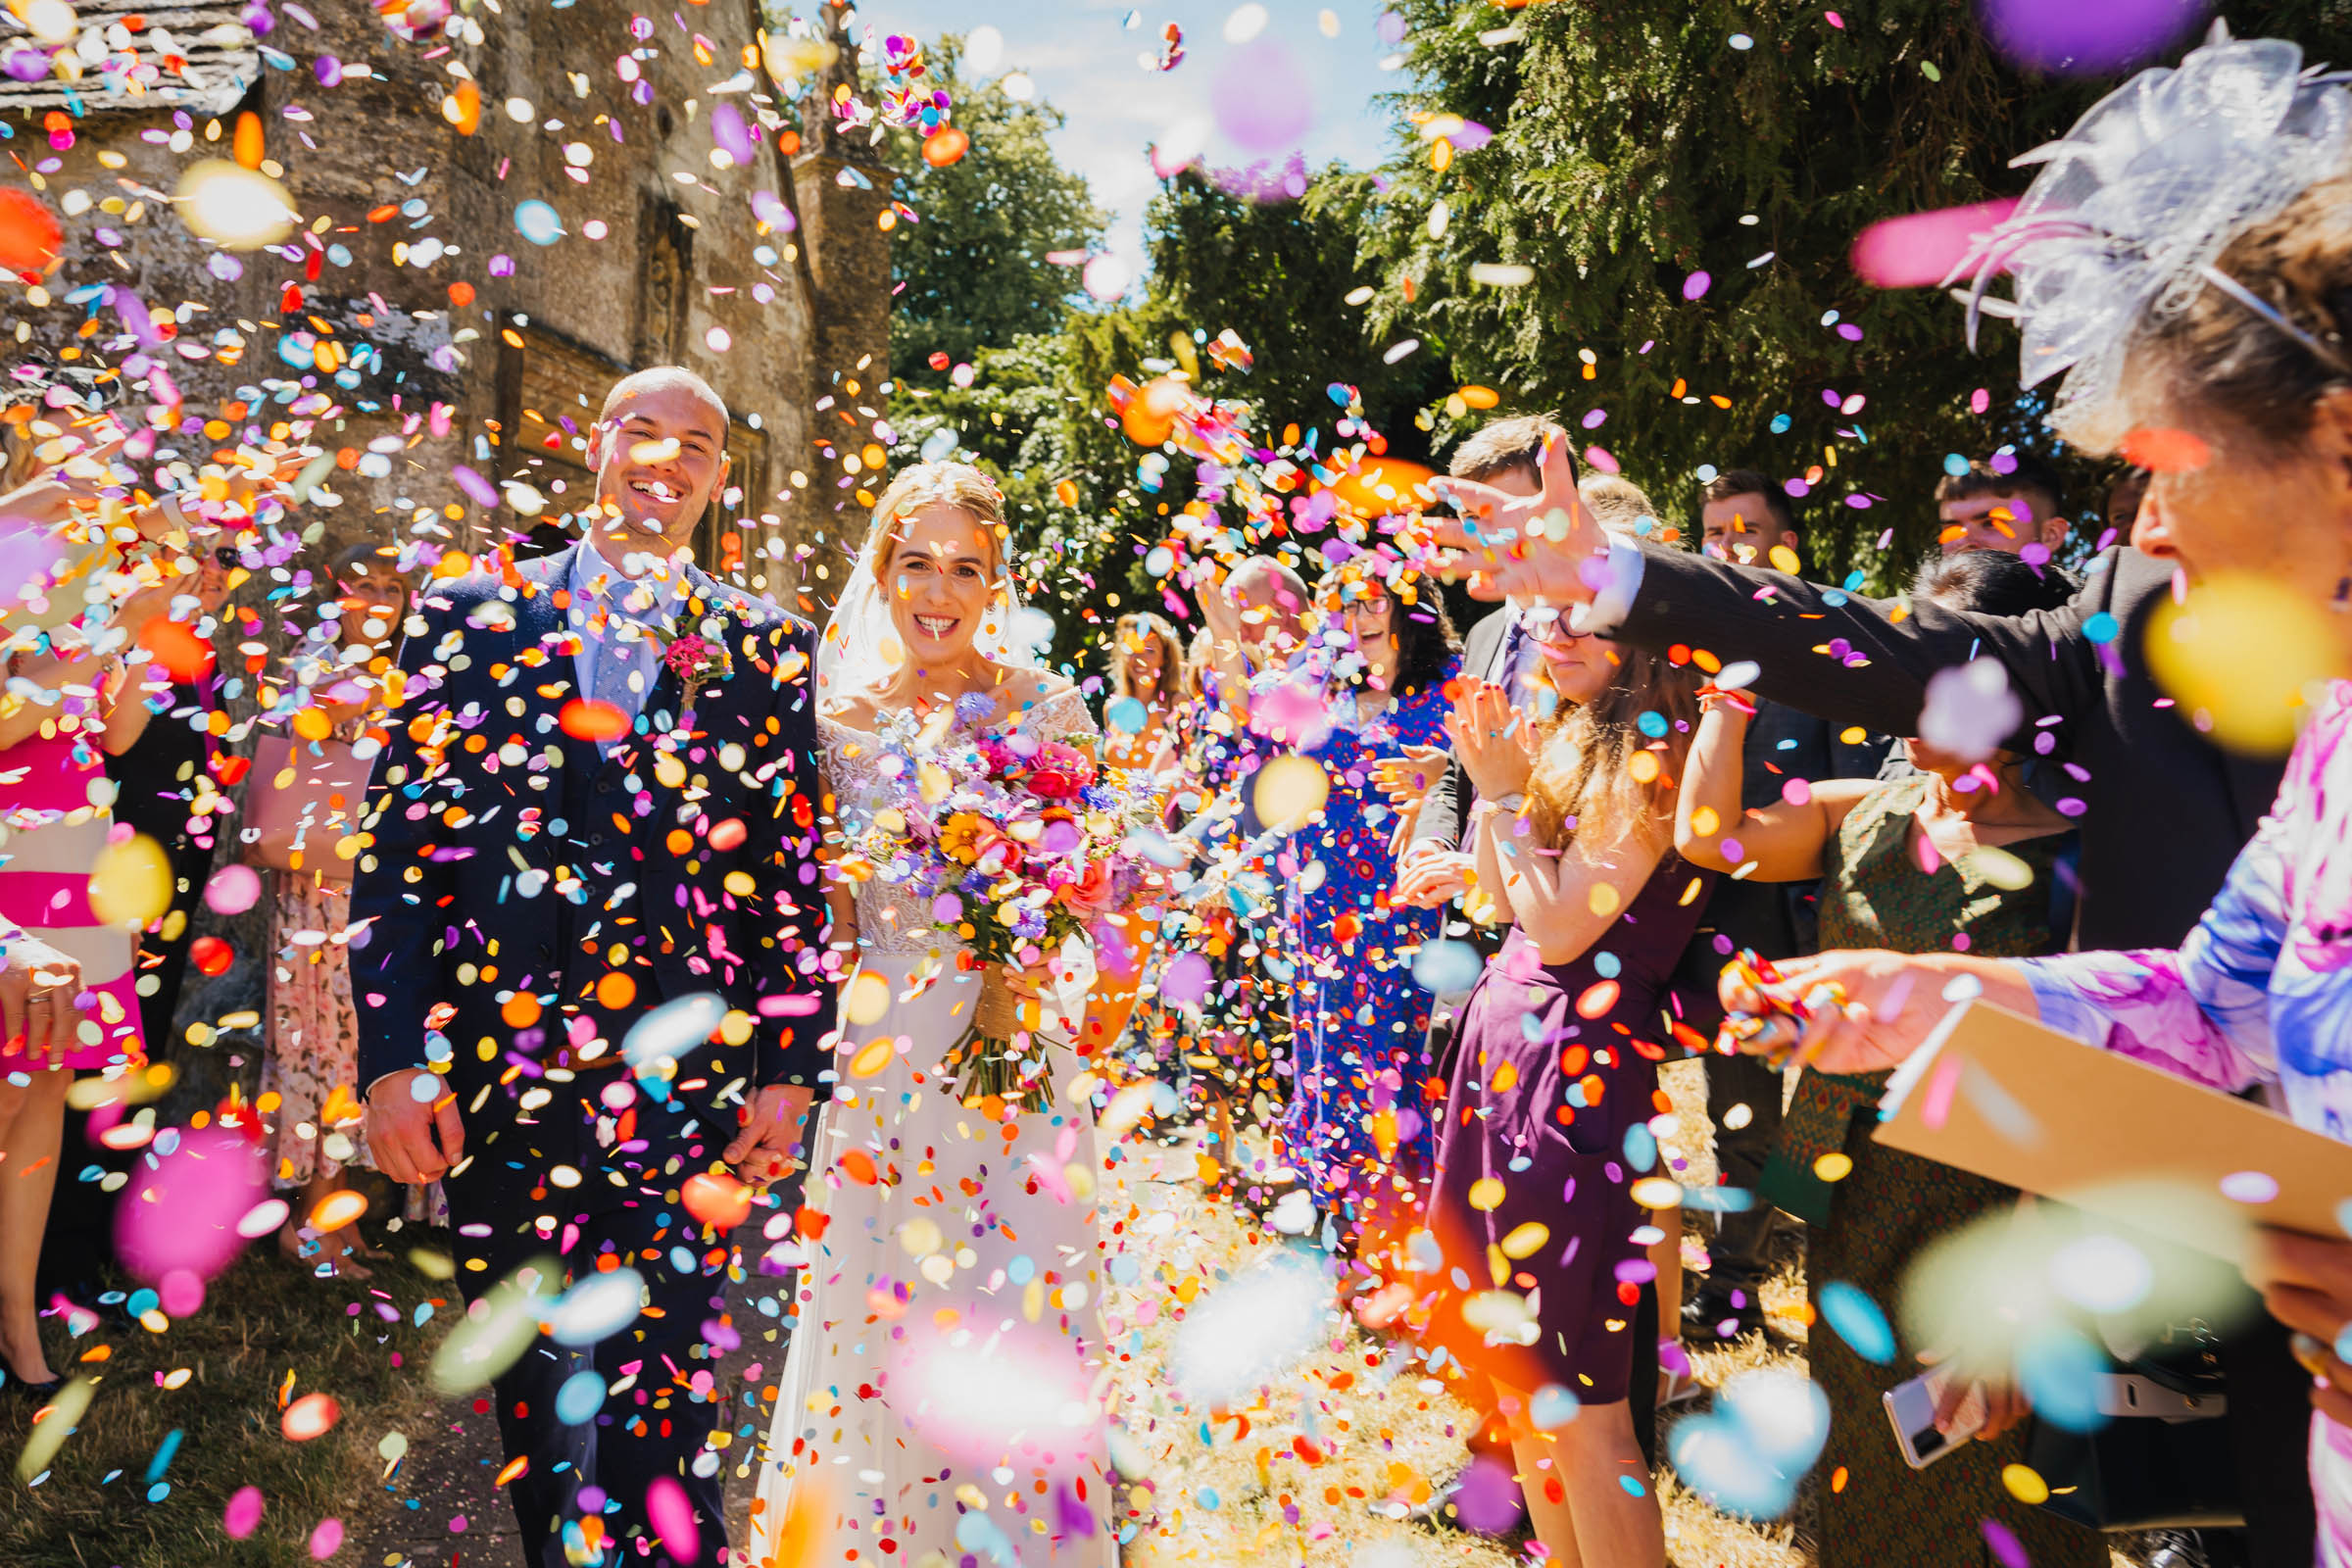 A showering of confetti over the bride and groom has they leave their Herefordshire church wedding ceremony